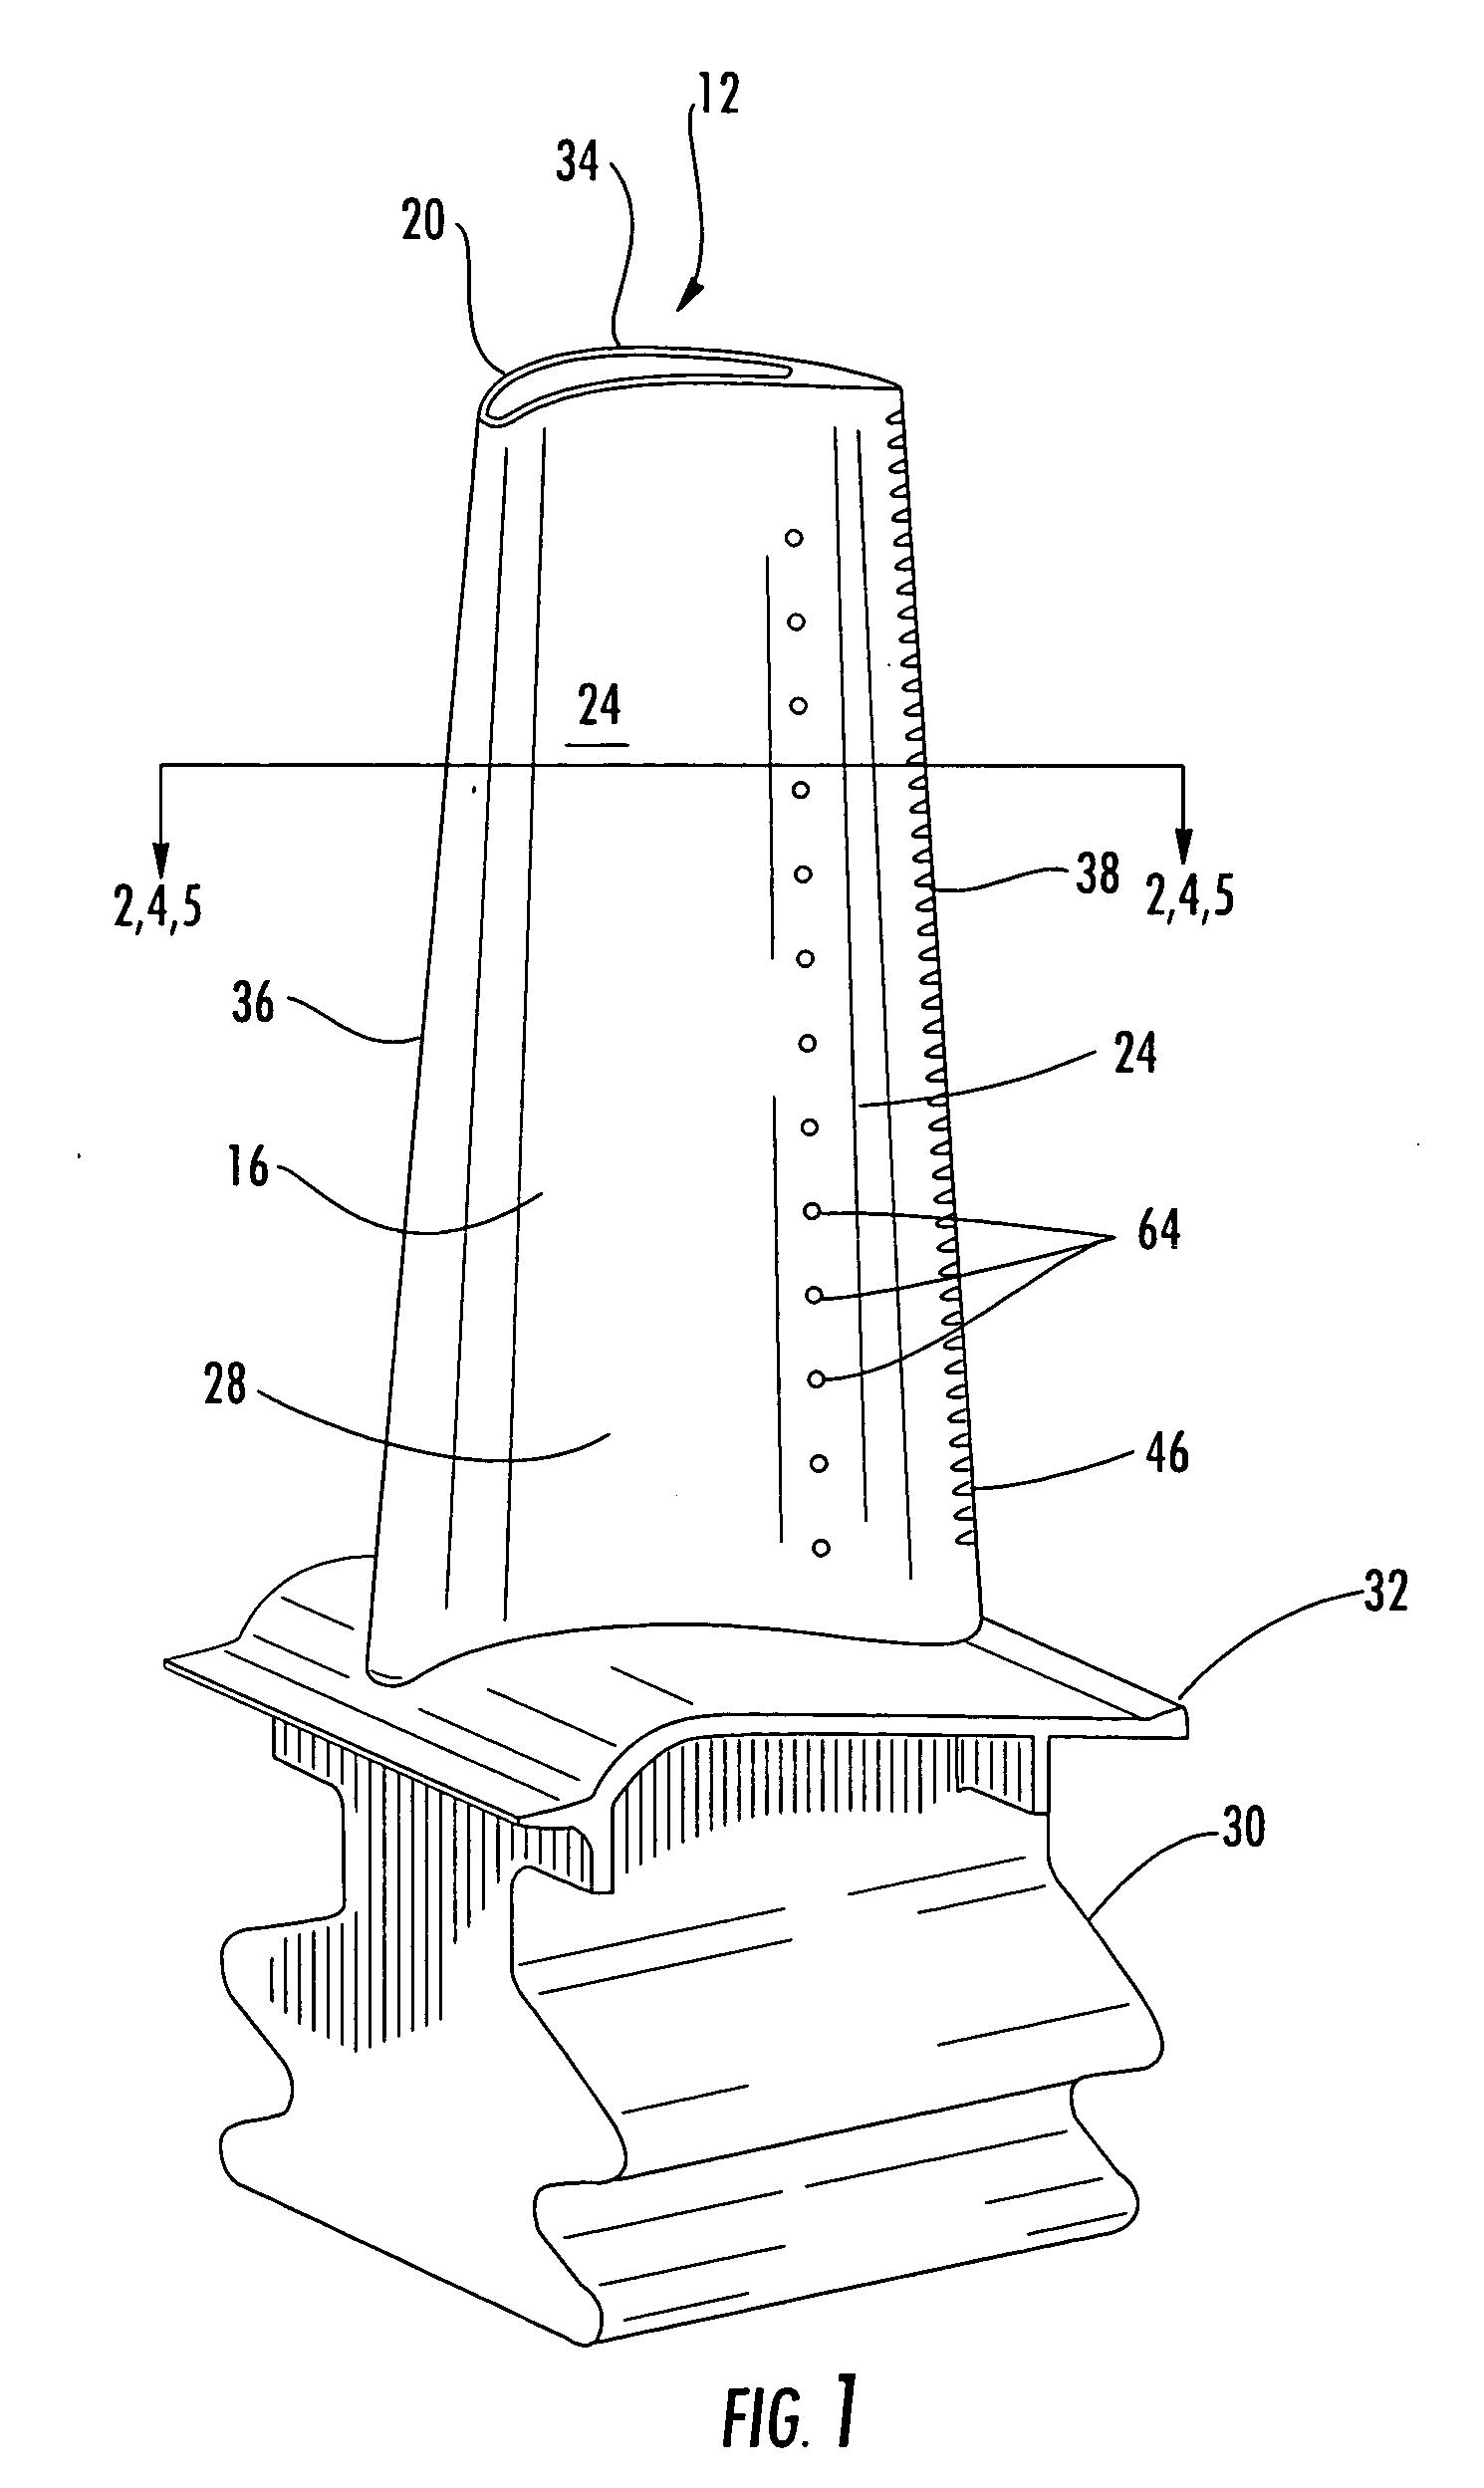 Turbine airfoil cooling system with near wall pin fin cooling chambers